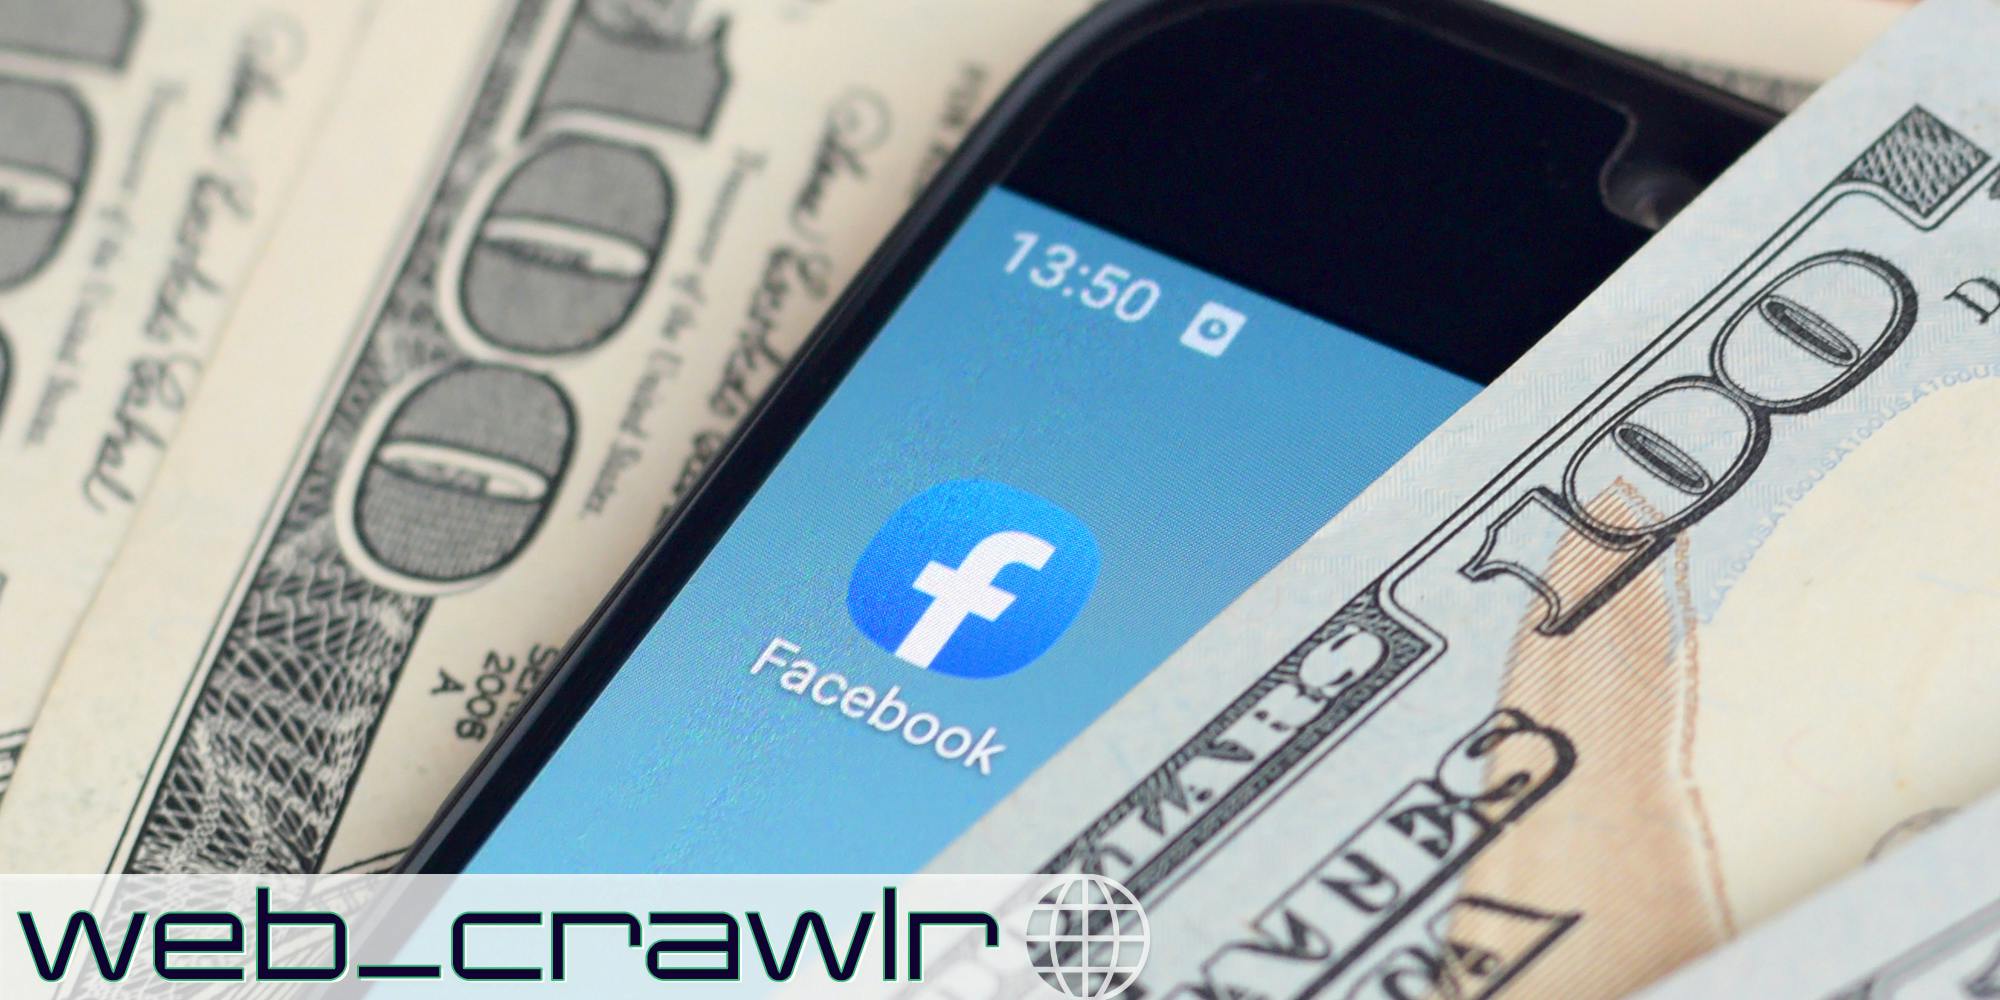 A phone showing the Facebook app next to $100 bills. The Daily Dot newsletter web_crawlr logo is in the bottom left corner.